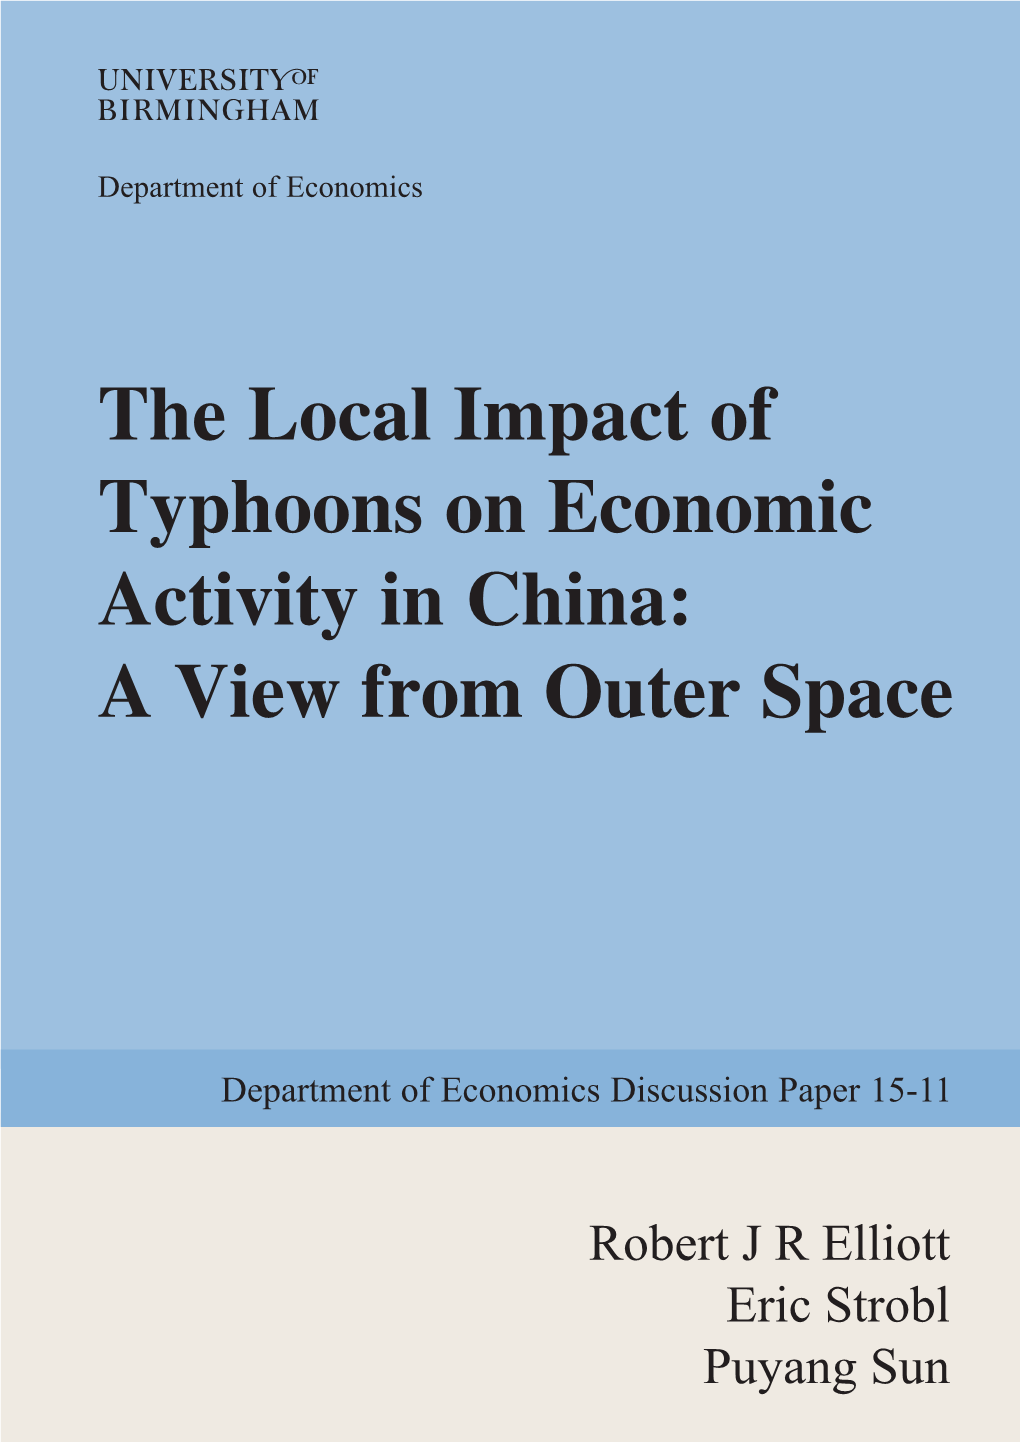 The Local Impact of Typhoons on Economic Activity in China: a View from Outer Space